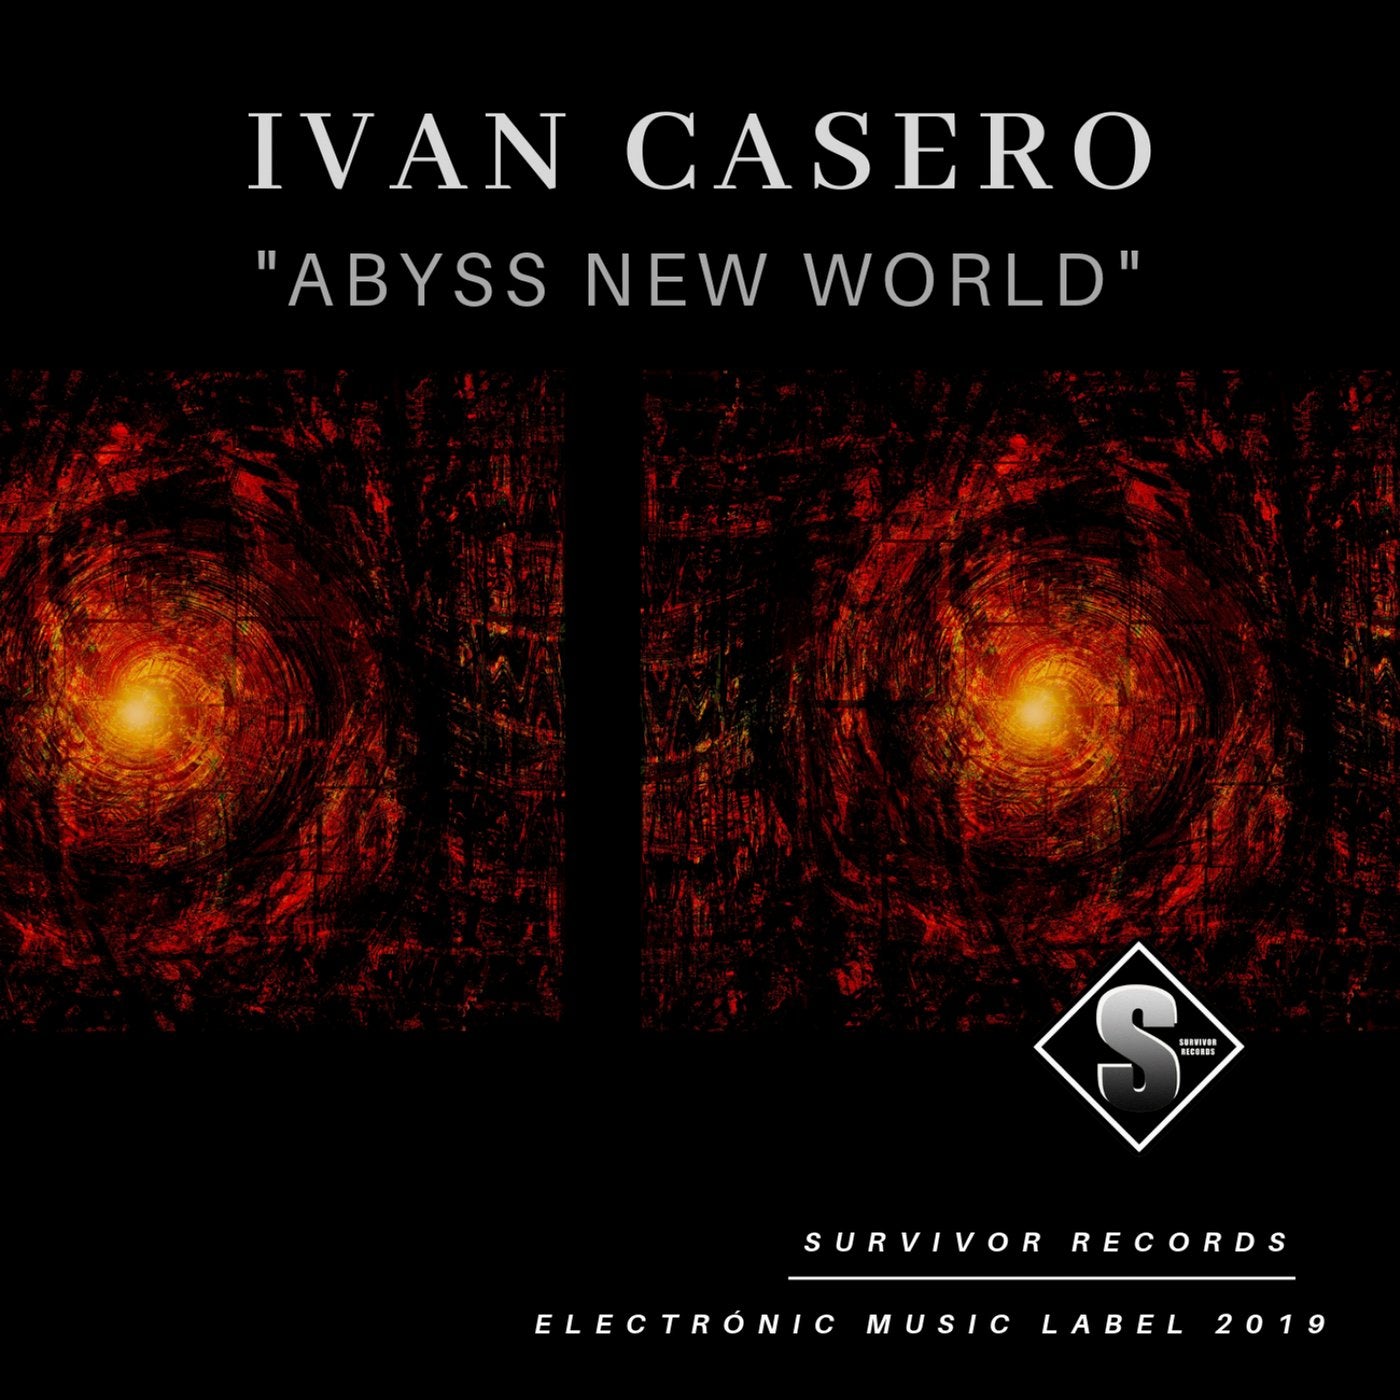 Abyss New World